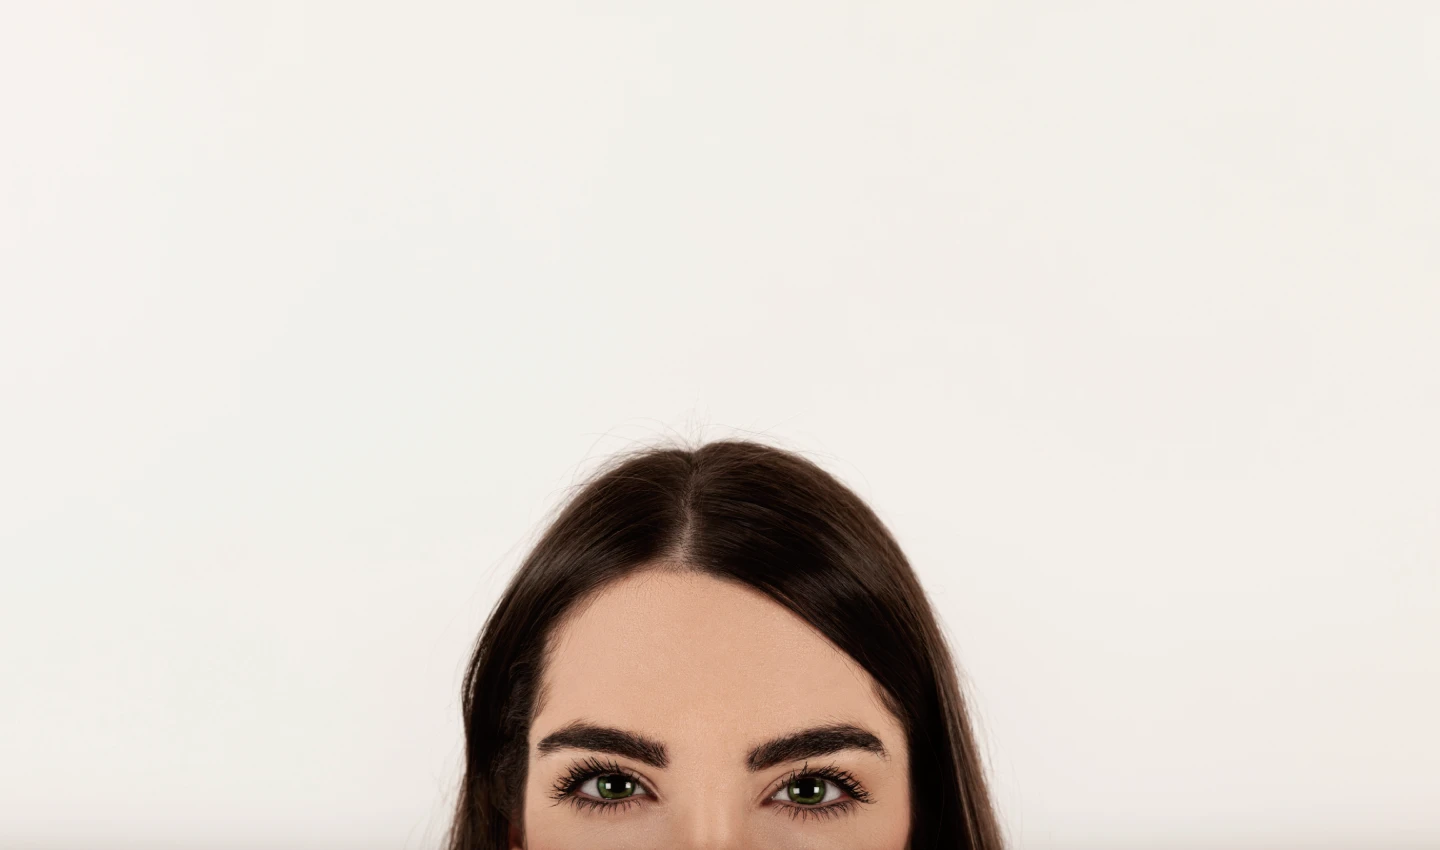 Woman's eyebrow styled with brow gel showcasing benefits of fuller, defined brows.